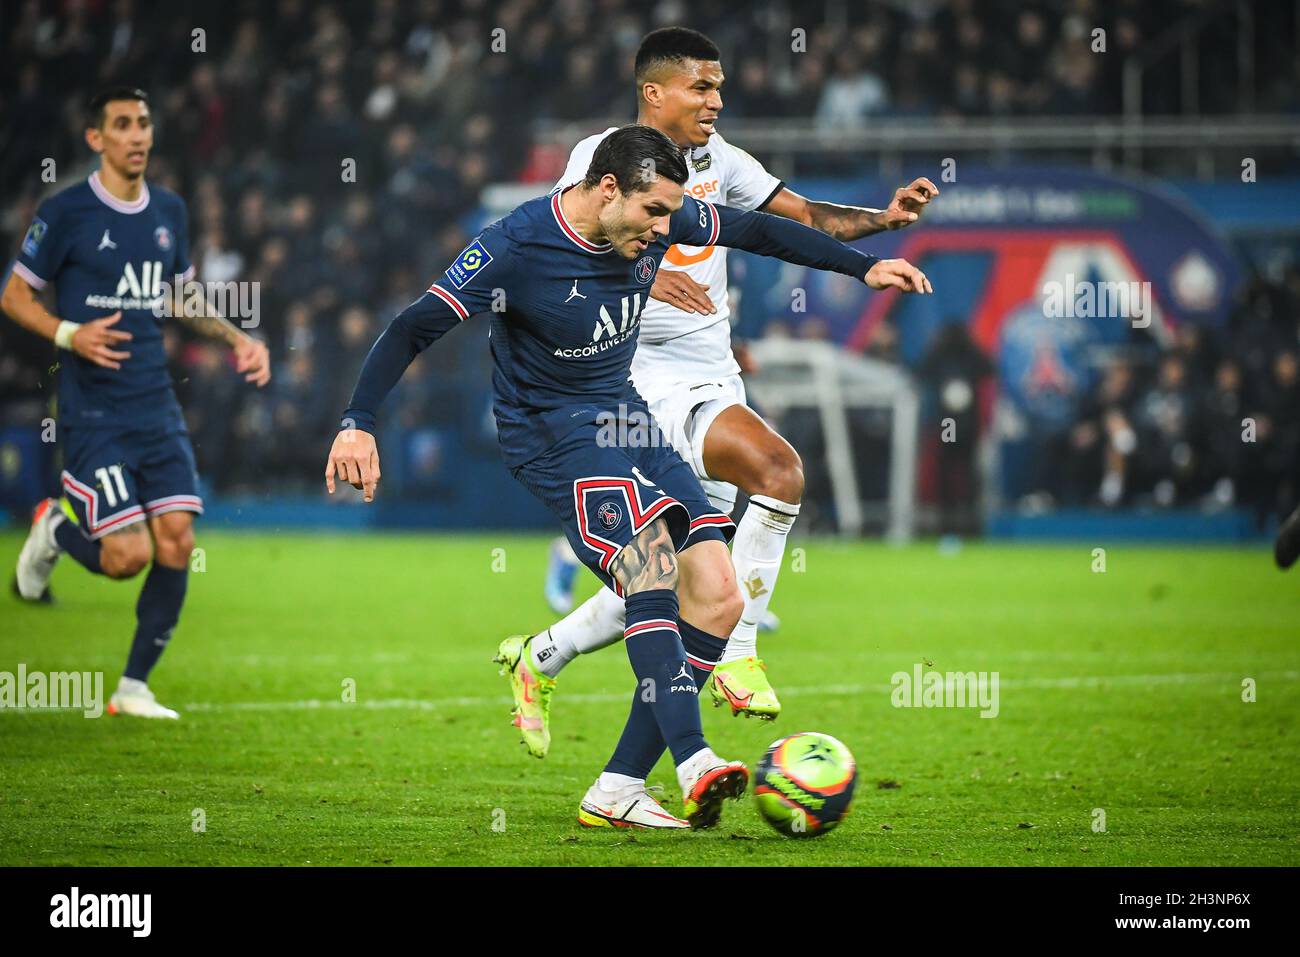 Paris, France. 29th Oct, 2021. Mauro ICARDI of PSG and REINILDO of Lille  during the French championship Ligue 1 football match between Paris  Saint-Germain and LOSC Lille on October 29, 2021 at